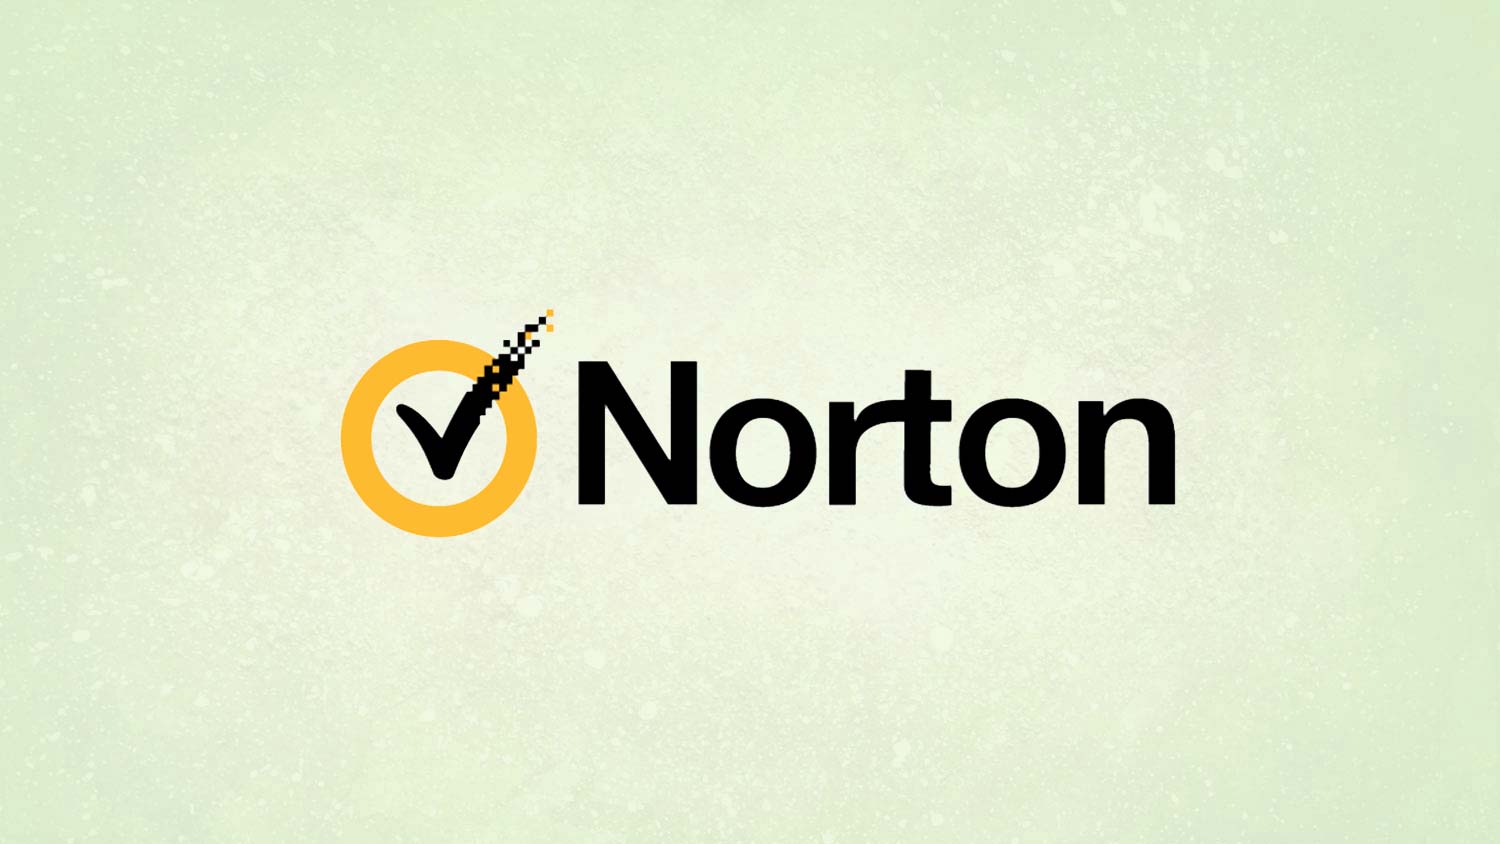 other then avast & norton the best cleaner for mac